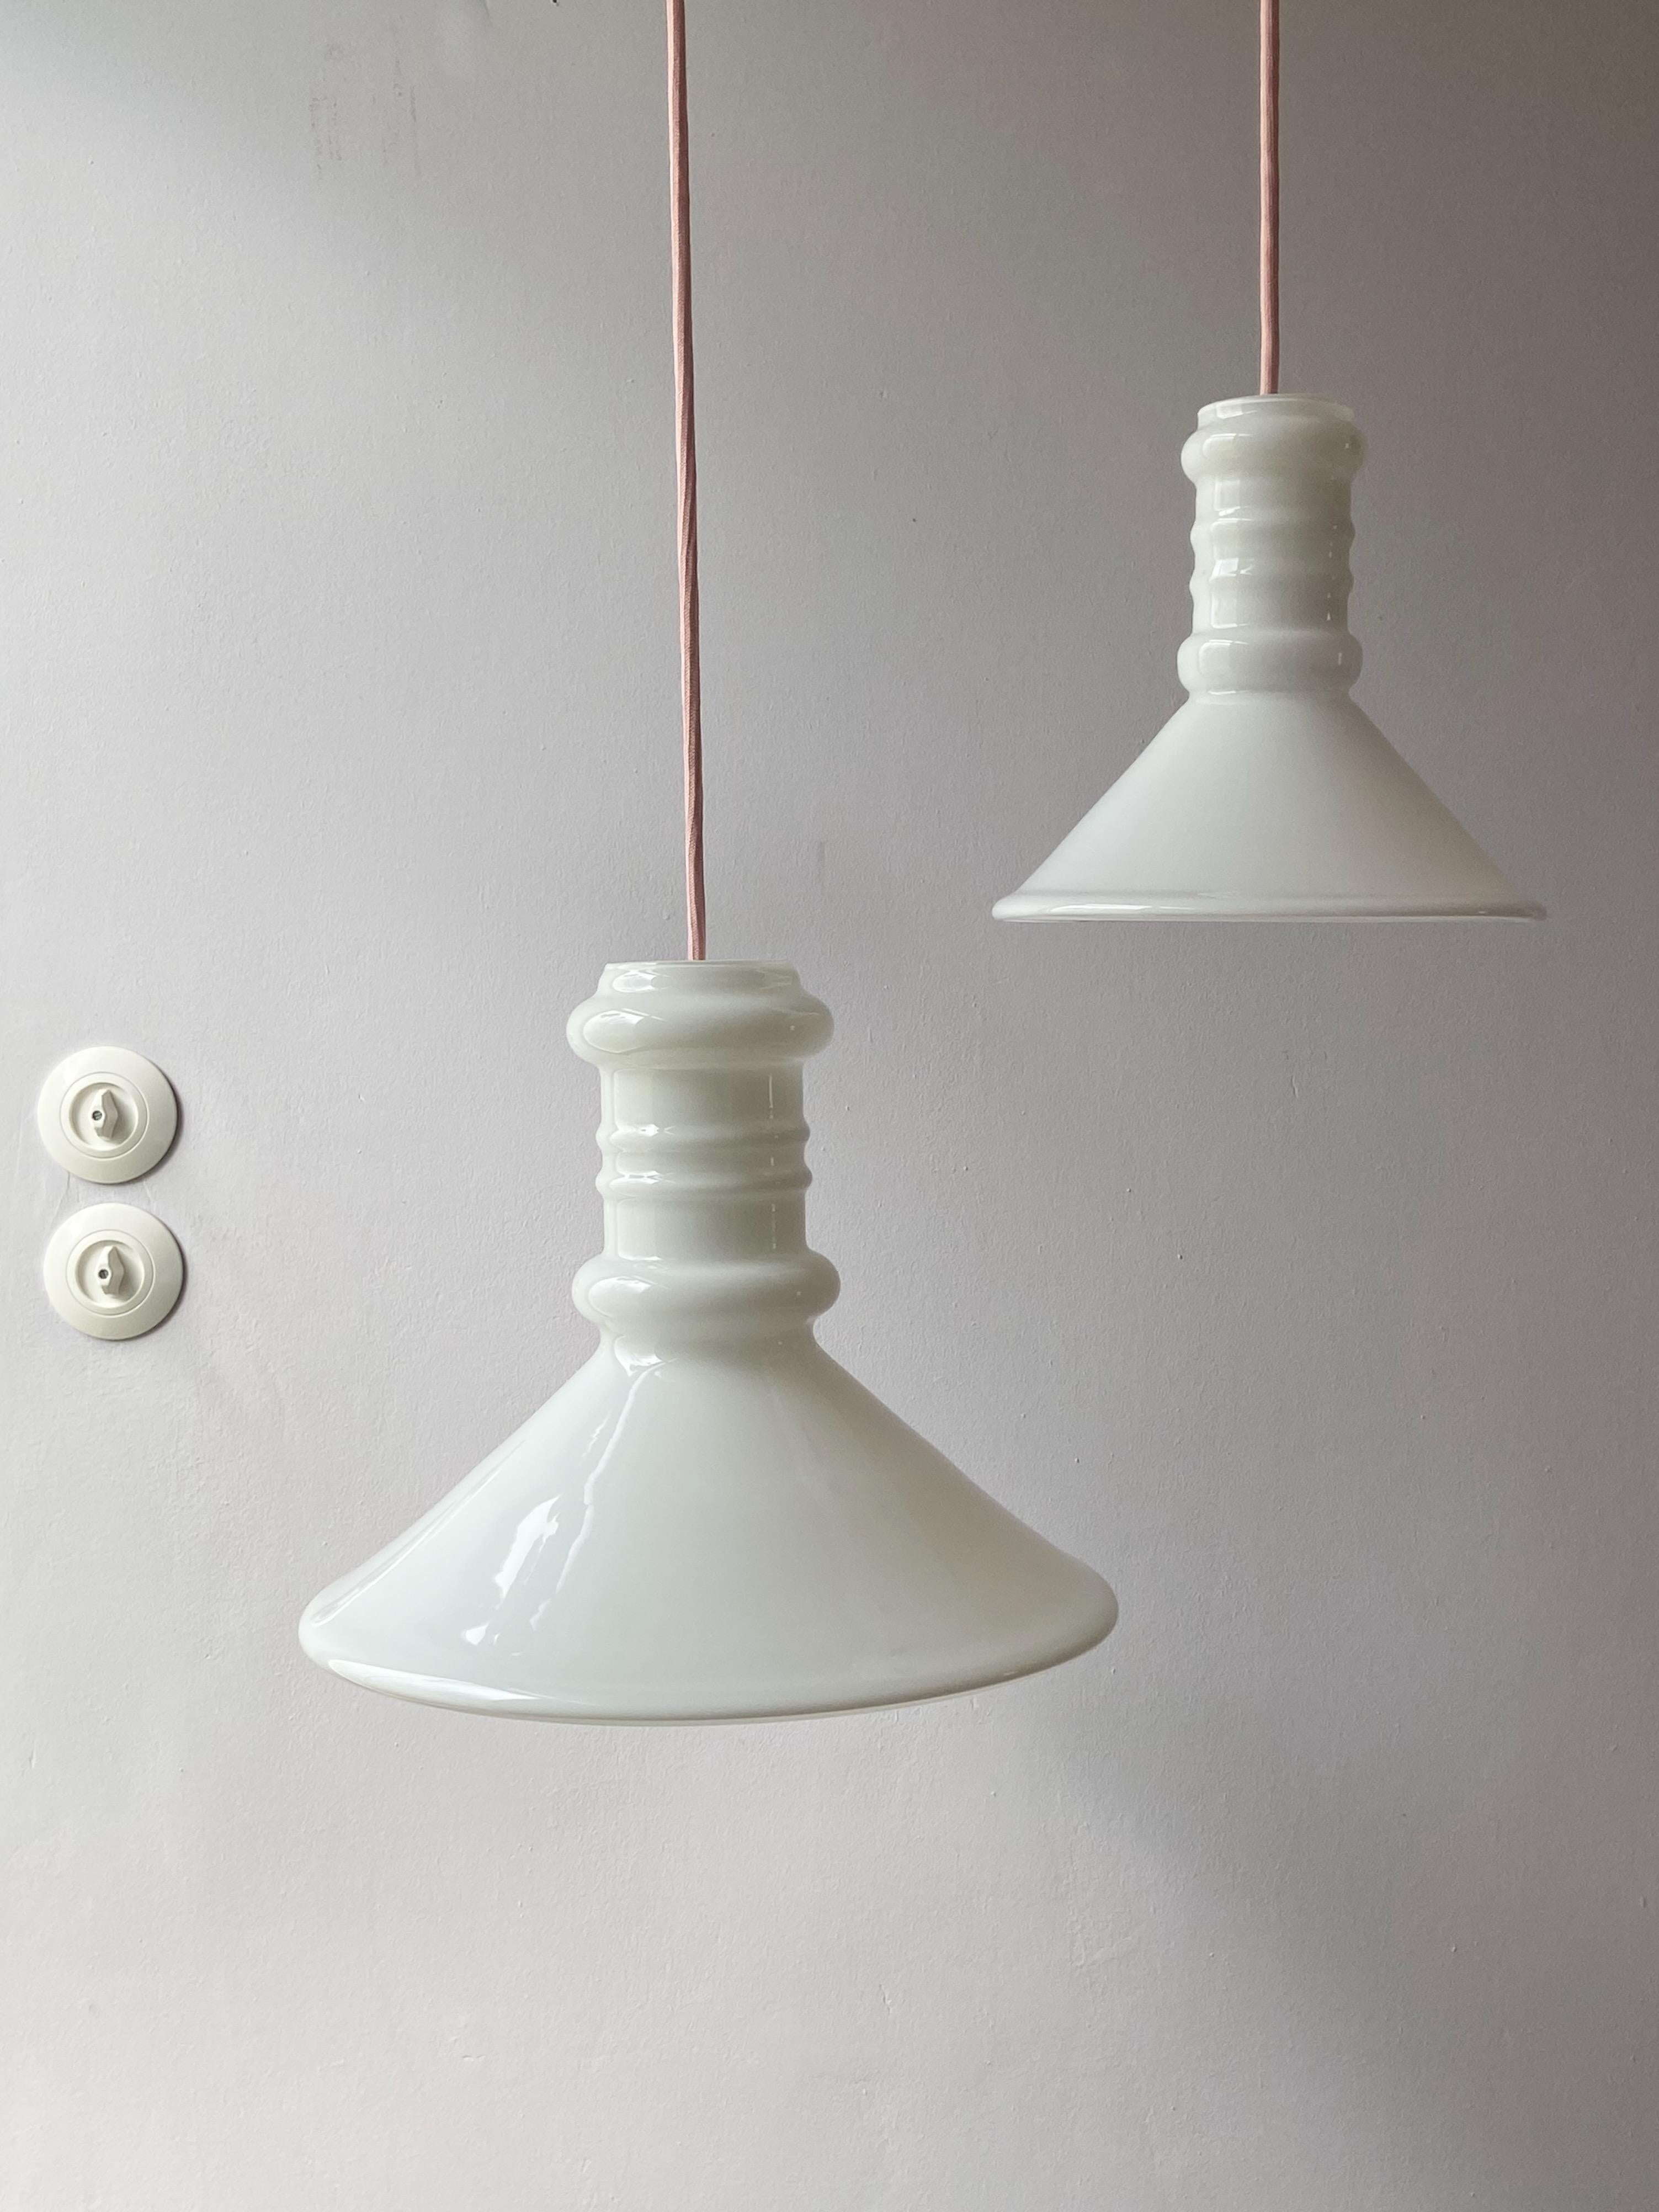 Large Apotheker pendant lamp designed by Sidse Werner for Holmegaard in the 1981. This Danish lamp is made of opaline glass and is whitek with transparent. The lamp is in very good condition, no damages and comes with pink fabric cord.